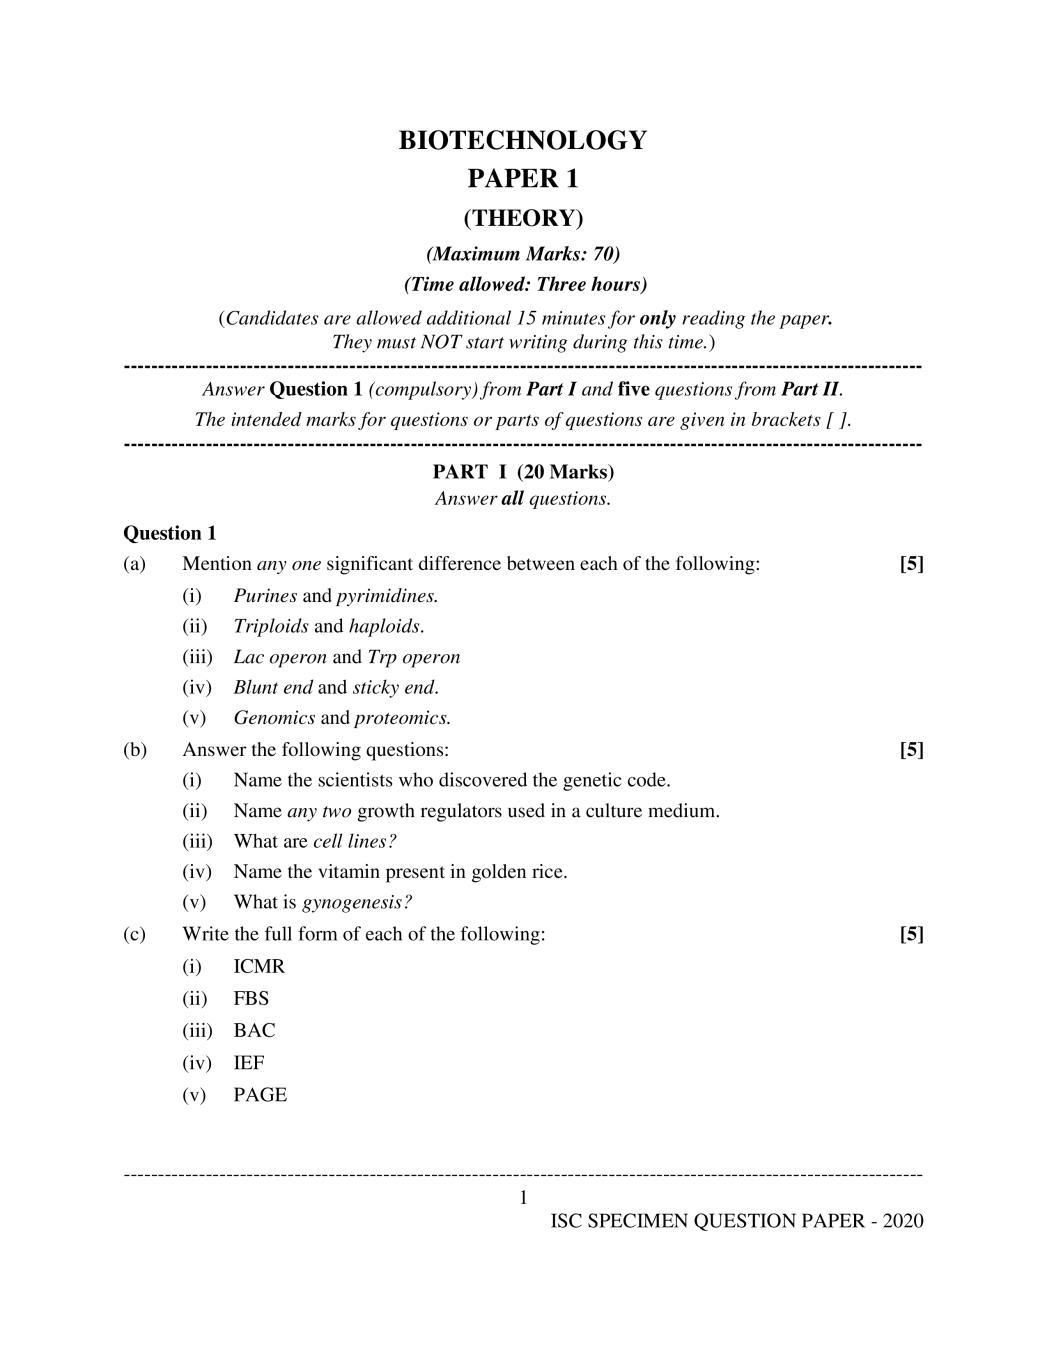 ISC Class 12 Specimen Paper 2020 for Biotechnology Paper 1 - Page 1